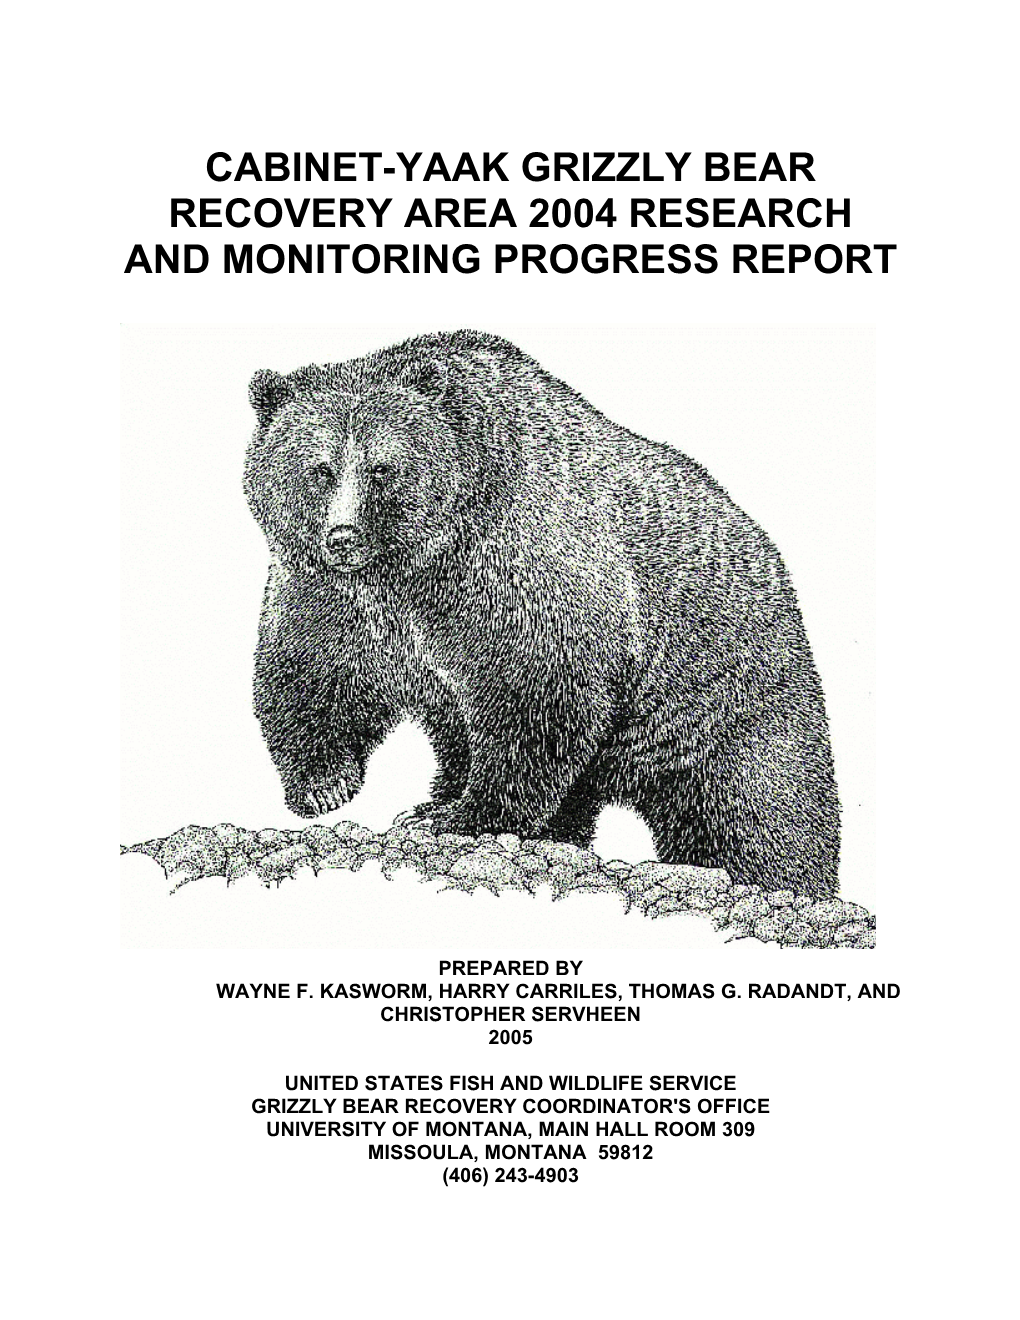 Cabinet-Yaak Grizzly Bear Recovery 2004 Research and Monitoring Progress Report